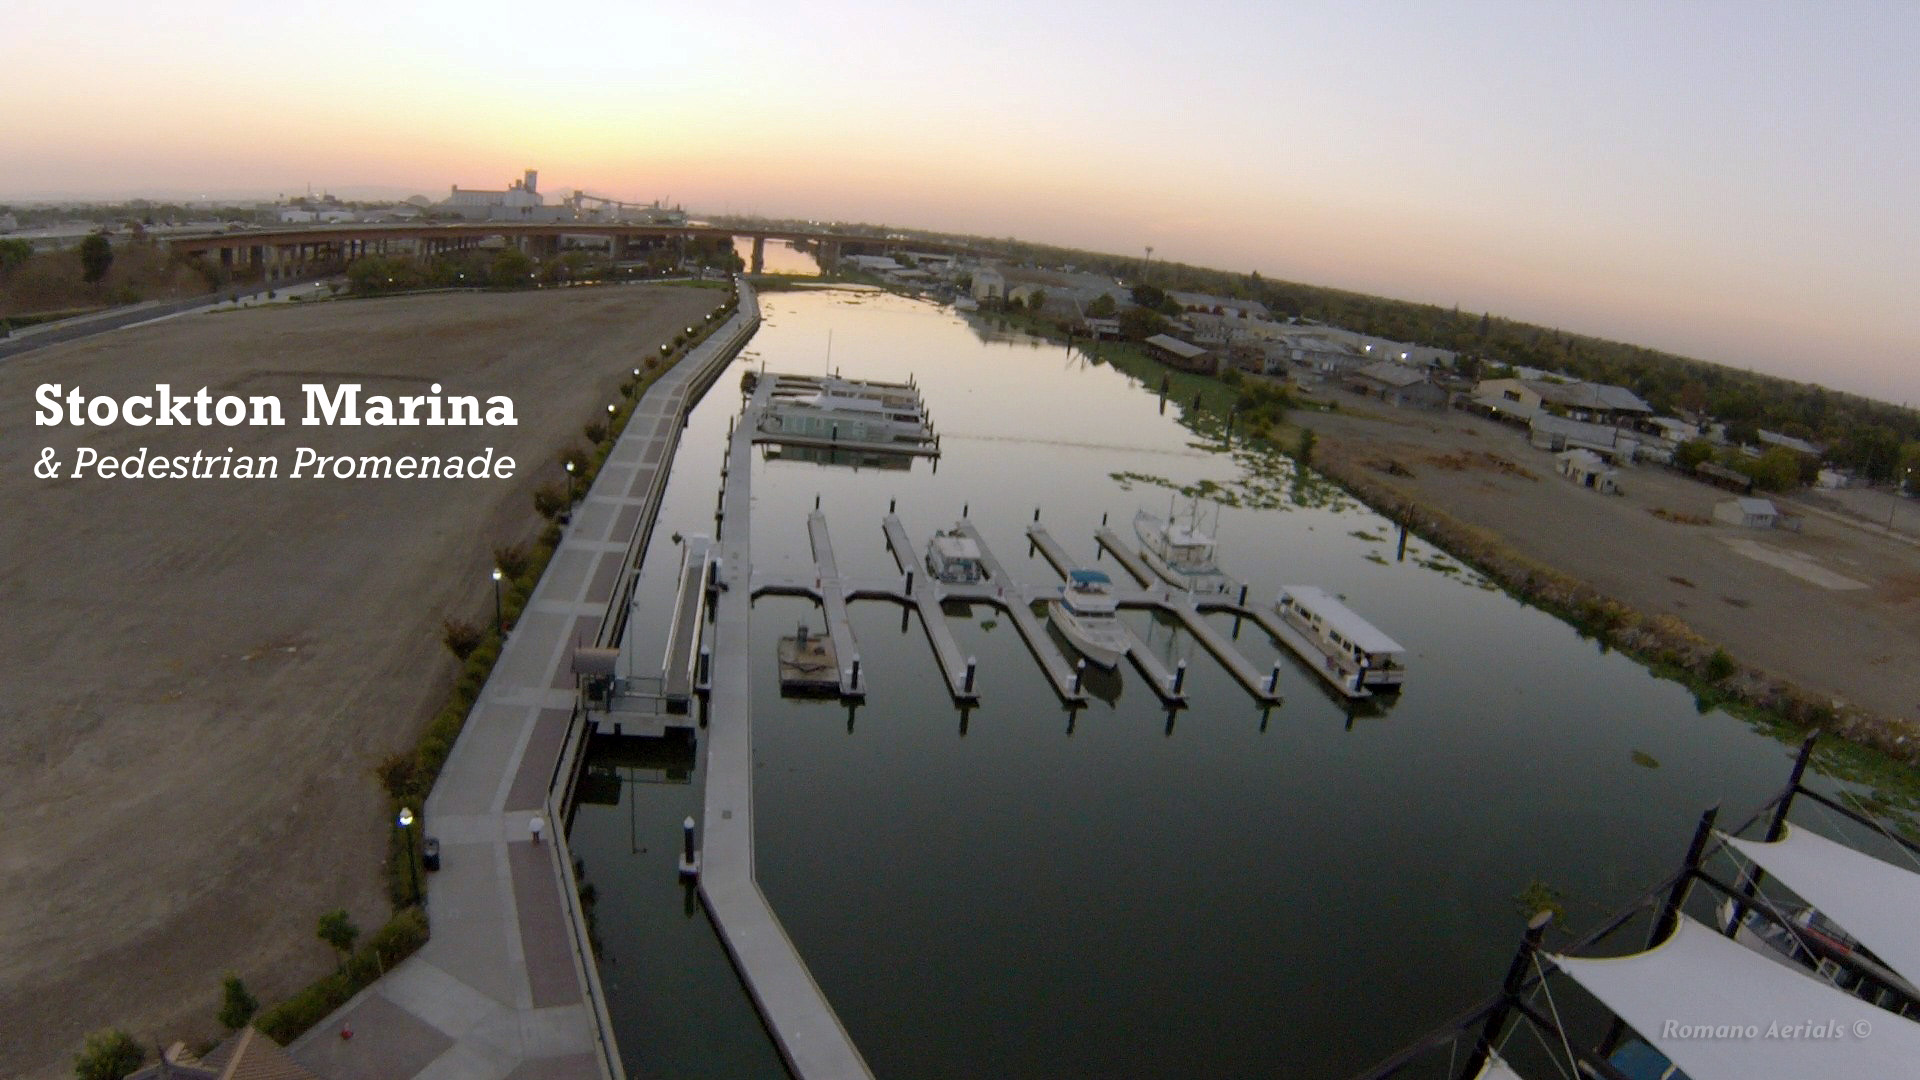 Looking West from above The Stockton Marina. The Port of Stockton in the distance.